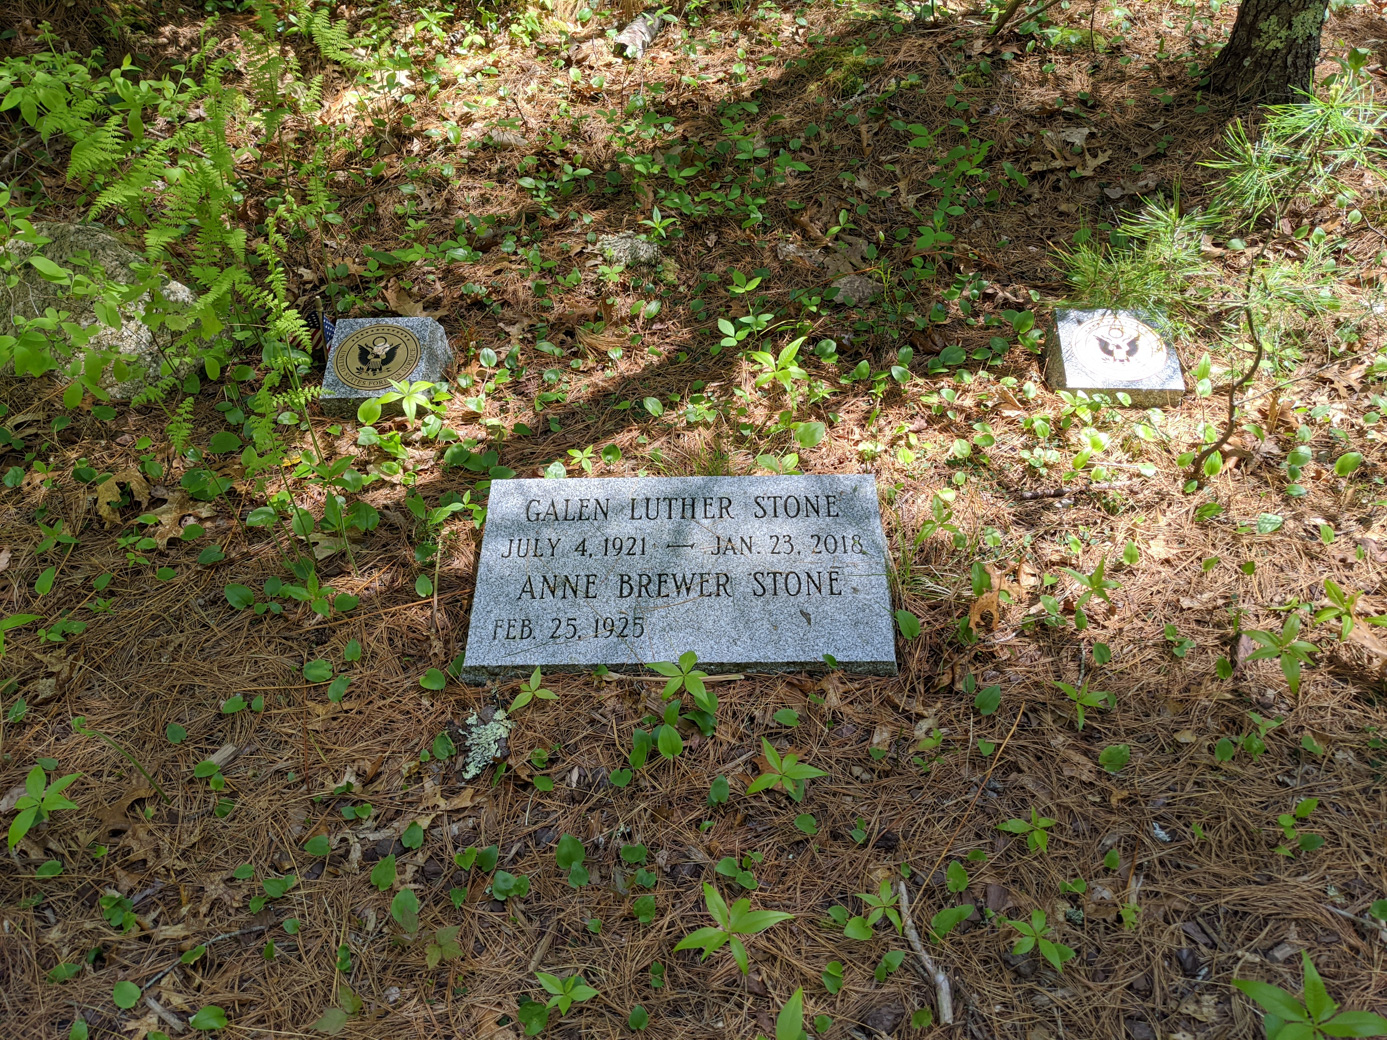 Cemetery marker for Galen Stone